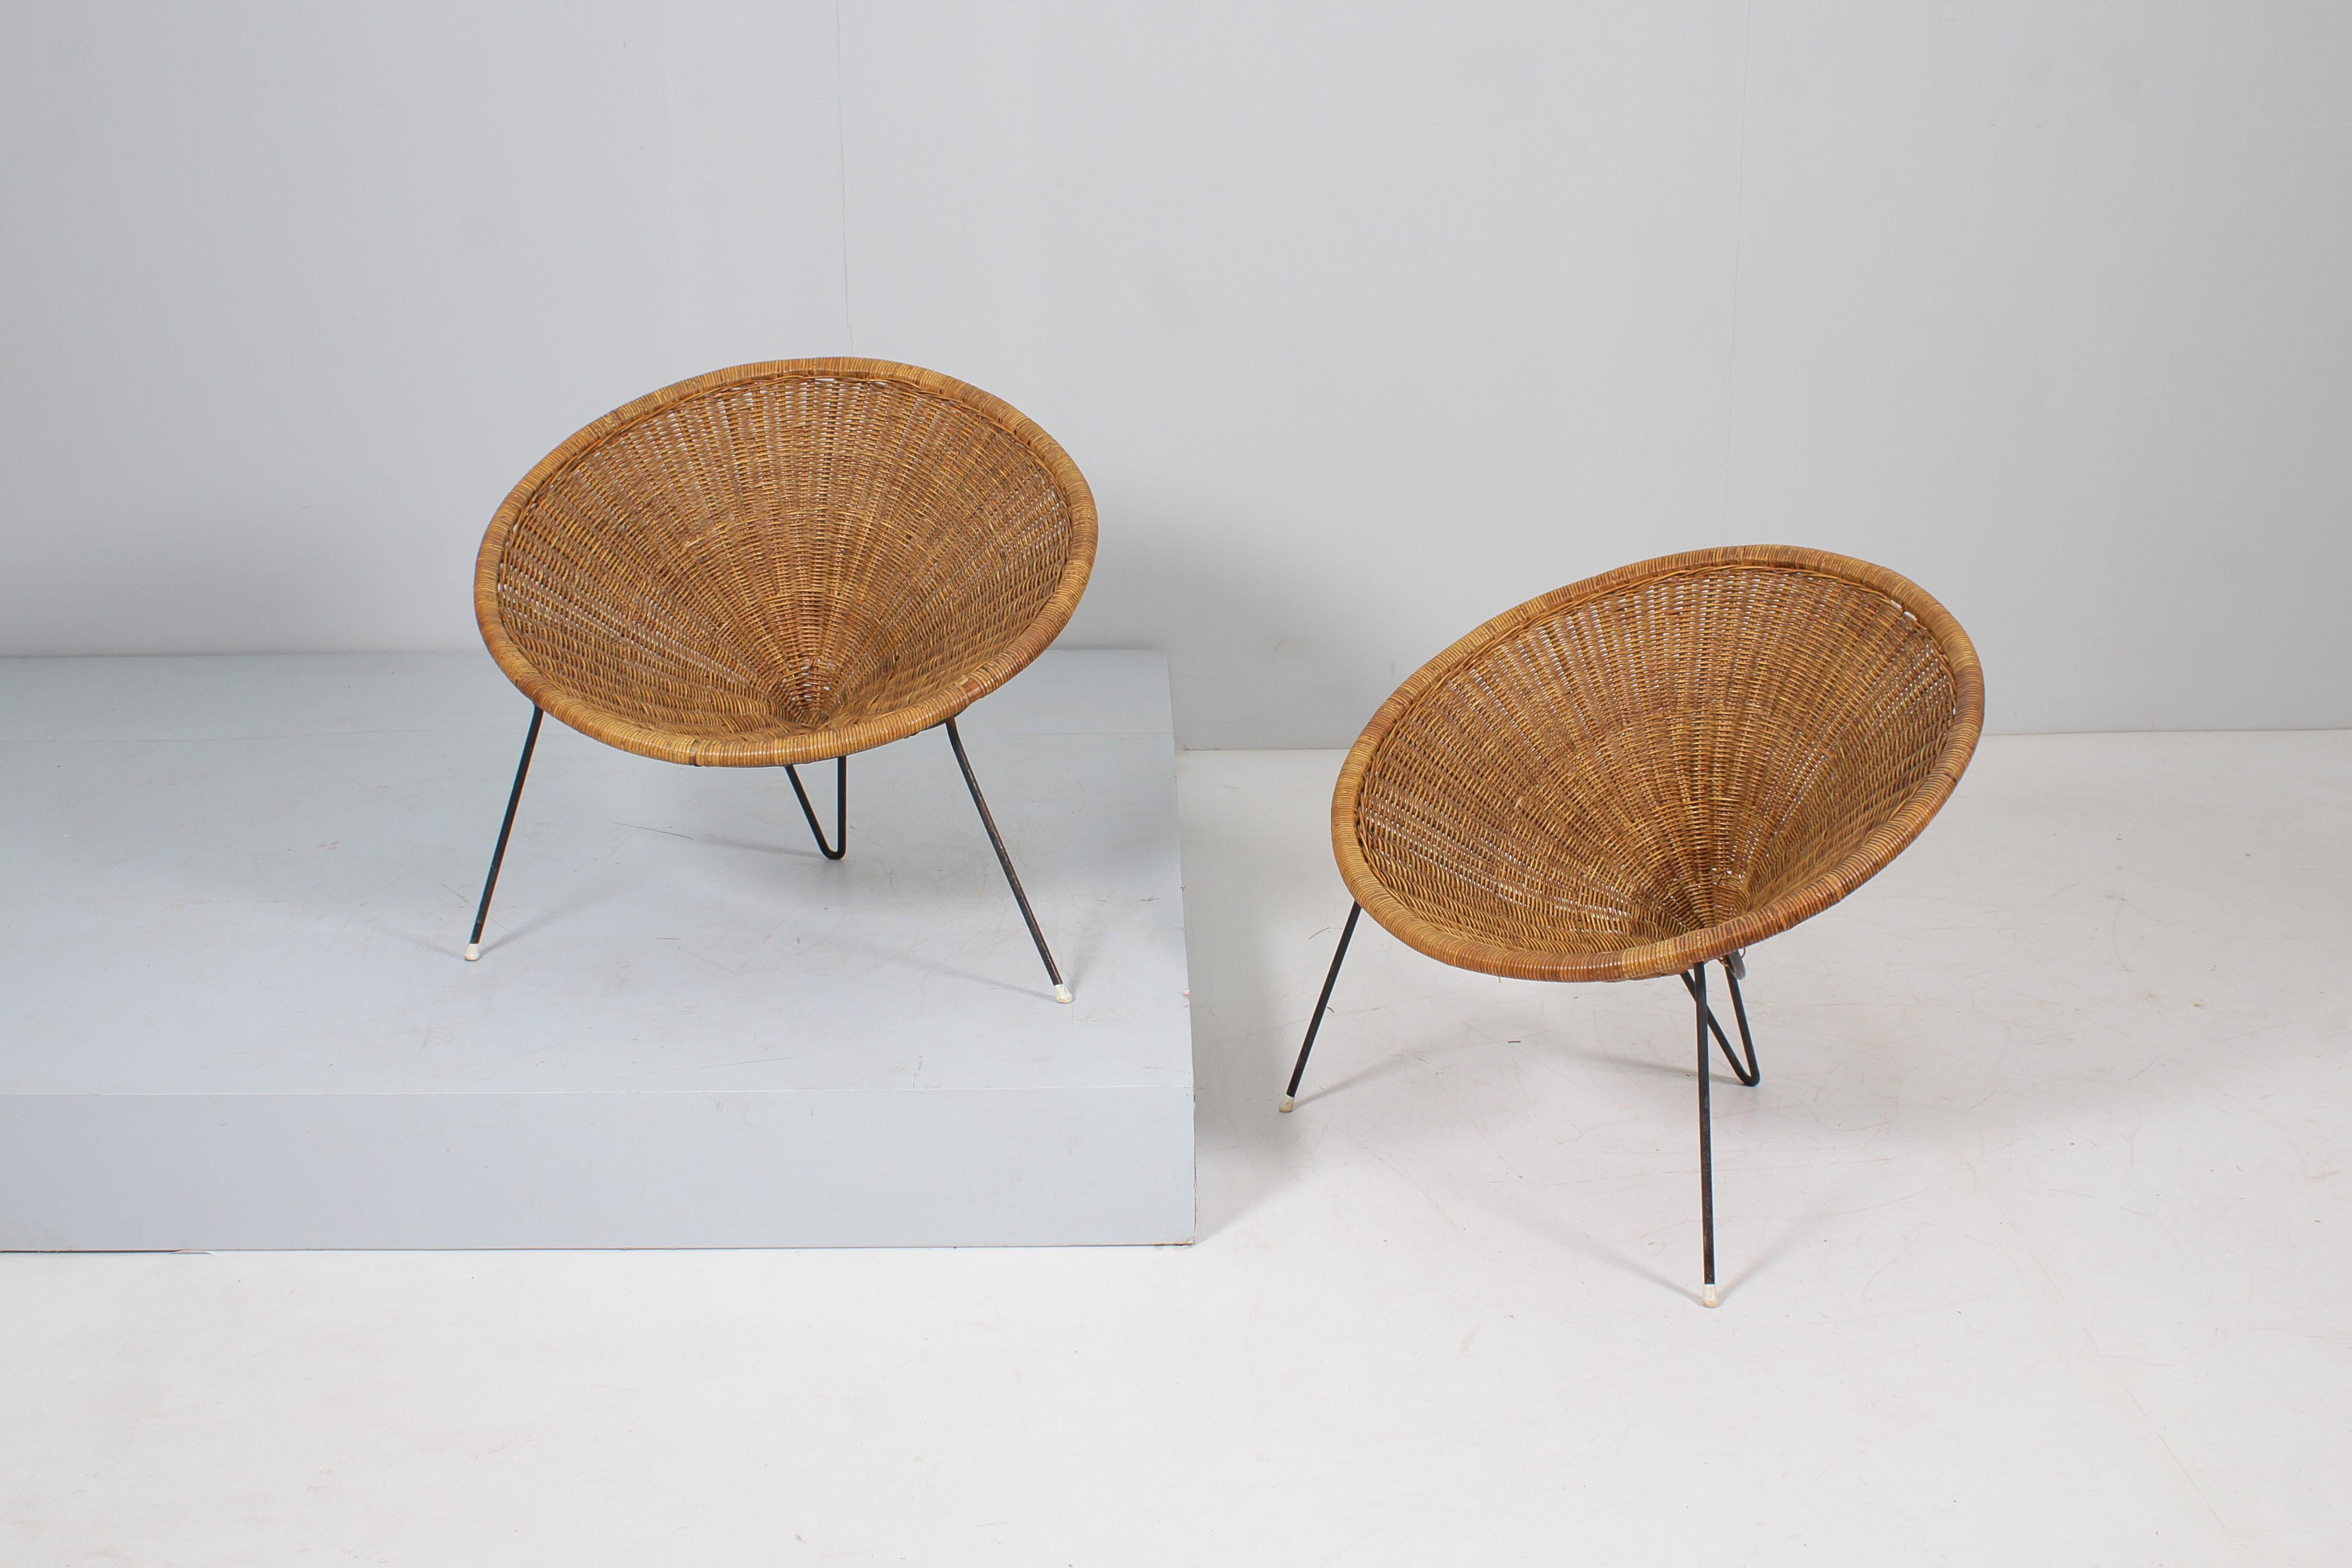 Set of 2 extremely rare conical wicker armchairs by Roberto Mango, made in Italy in the 1950s.
The conical seat shell is made entirely of wicker, the three-legged iron structure is composed of two legs in front and a hairpin leg in back.
The body is